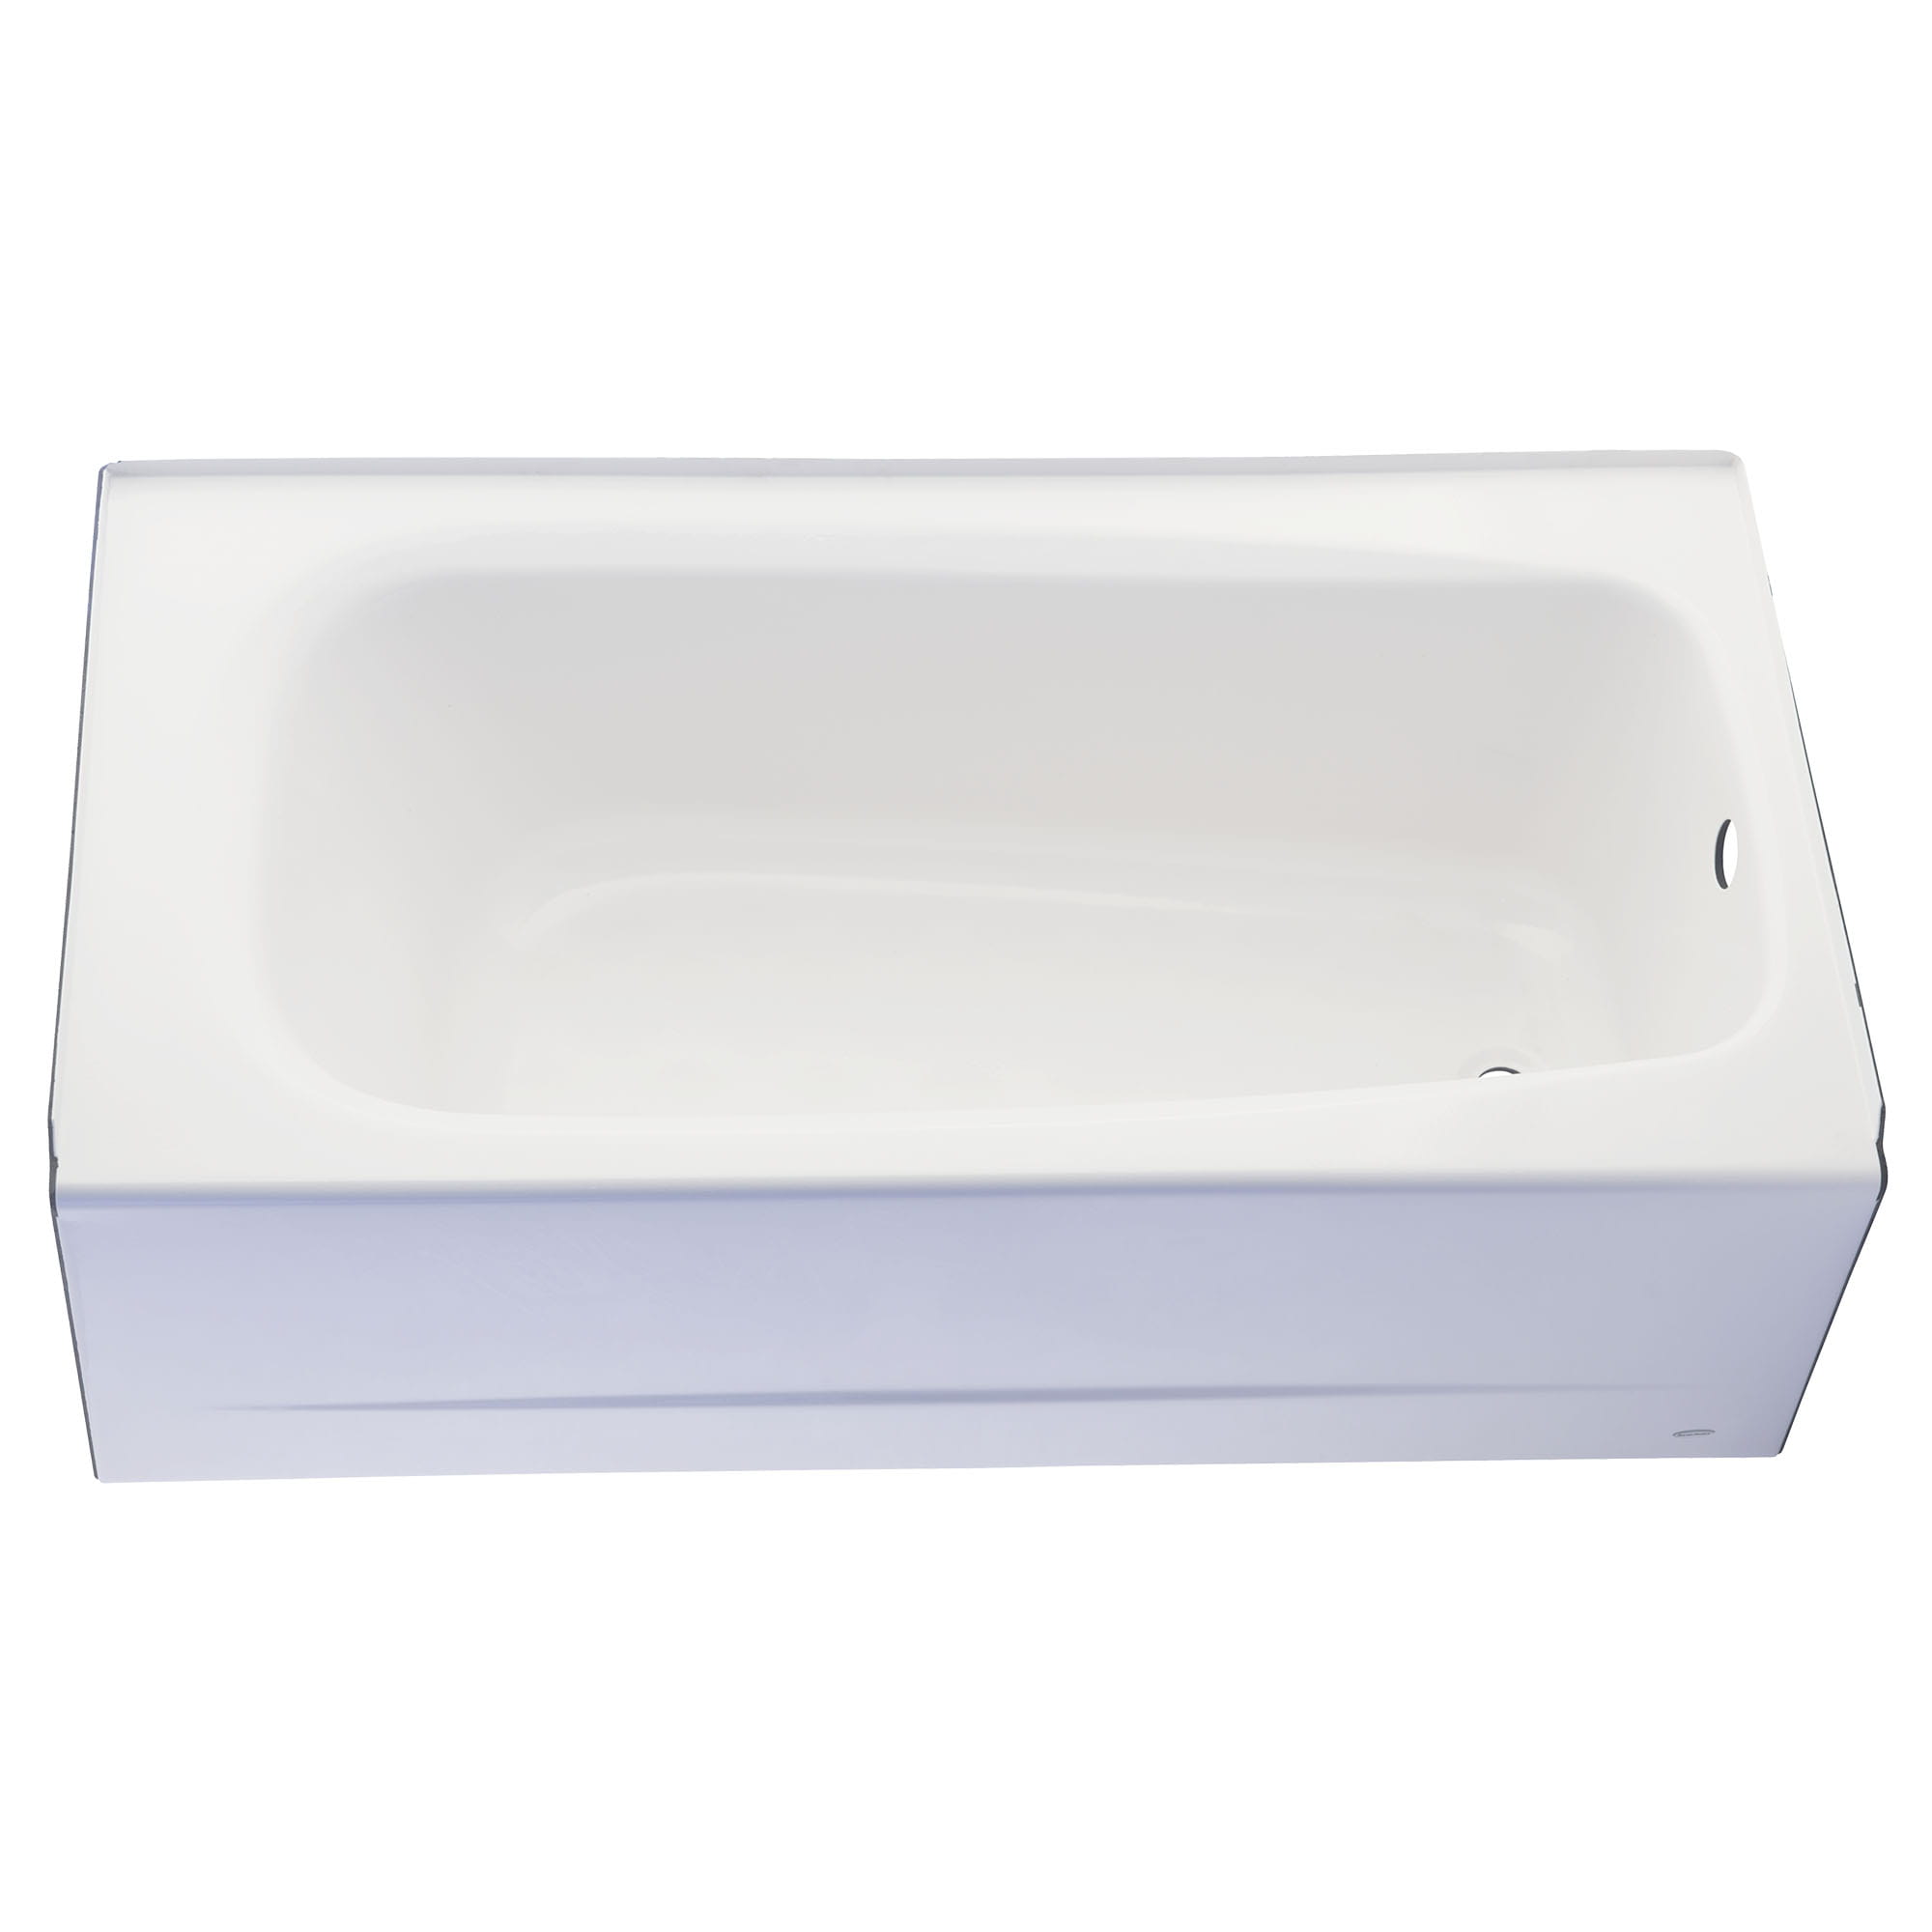 Cambridge Americast 60 x 32 Inch Integral Apron Bathtub With Left Hand Outlet ARCTIC